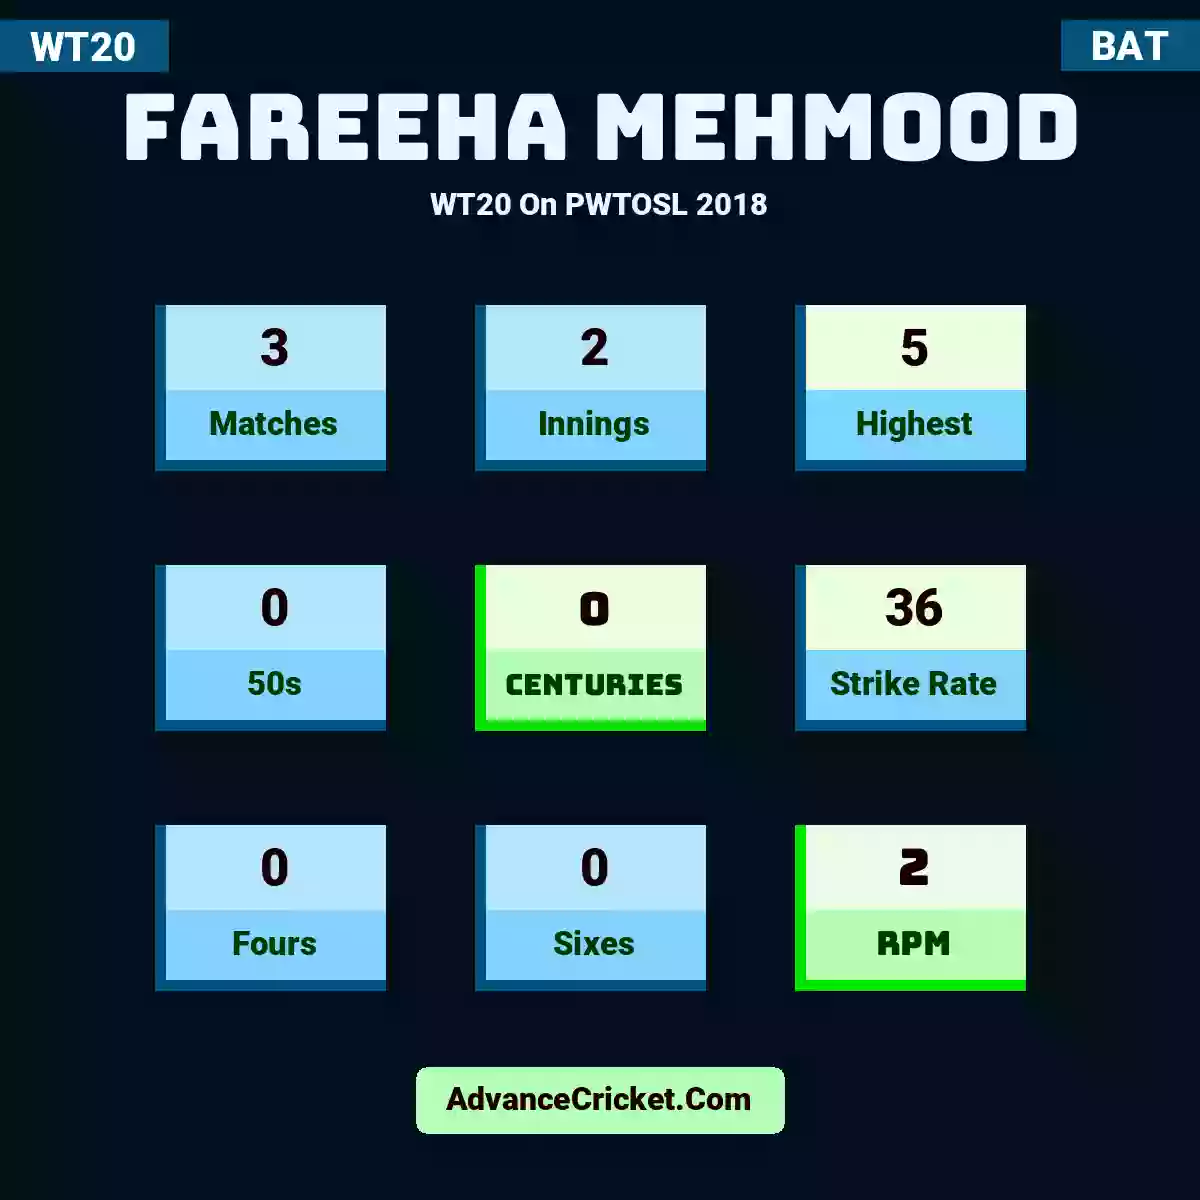 Fareeha Mehmood WT20  On PWTOSL 2018, Fareeha Mehmood played 3 matches, scored 5 runs as highest, 0 half-centuries, and 0 centuries, with a strike rate of 36. F.Mehmood hit 0 fours and 0 sixes, with an RPM of 2.